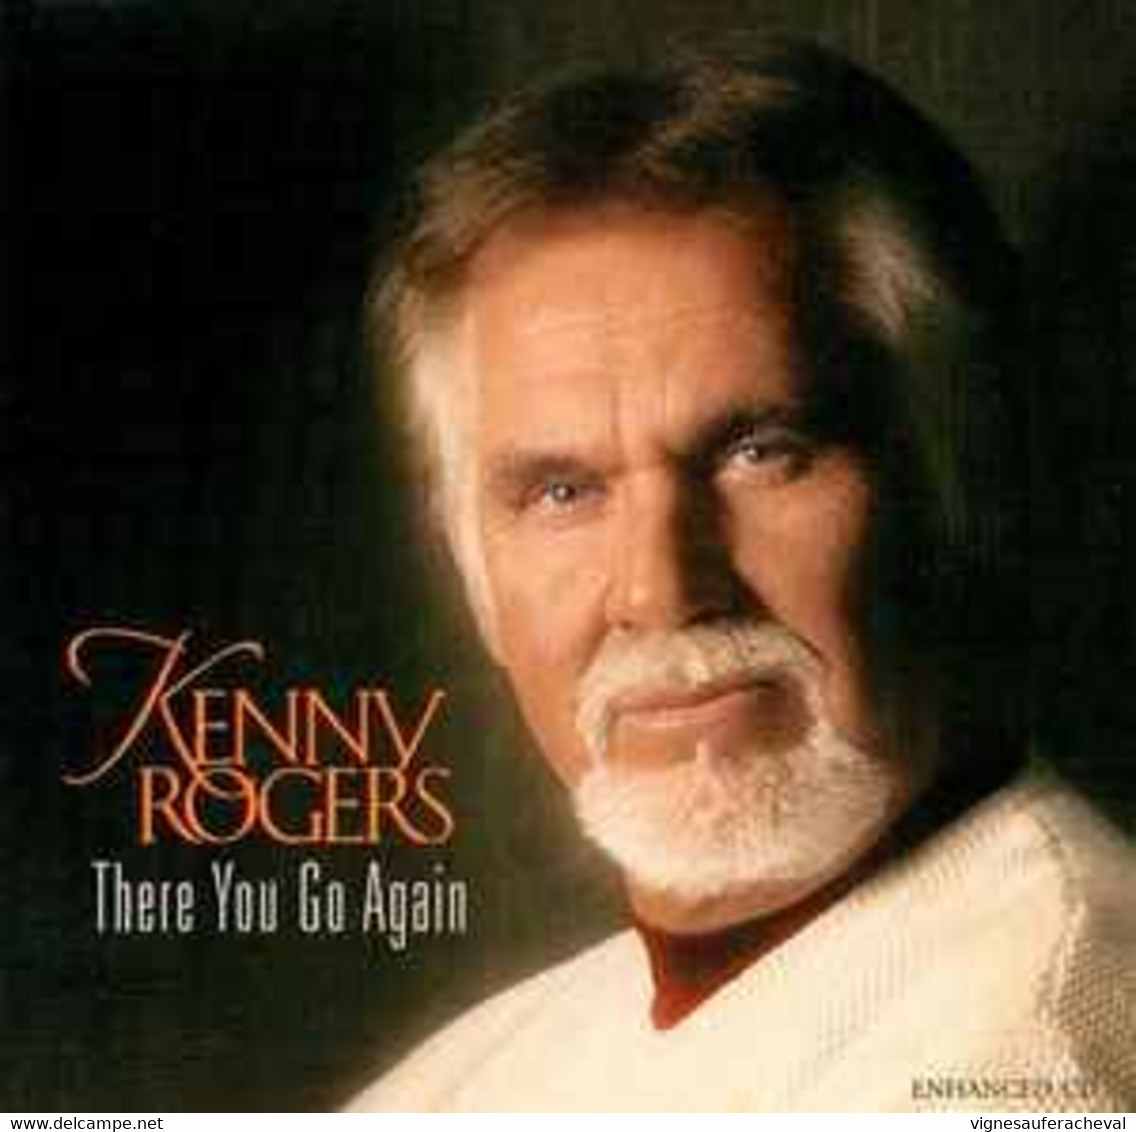 Kenny Rogers - There You Go Again - Other - English Music